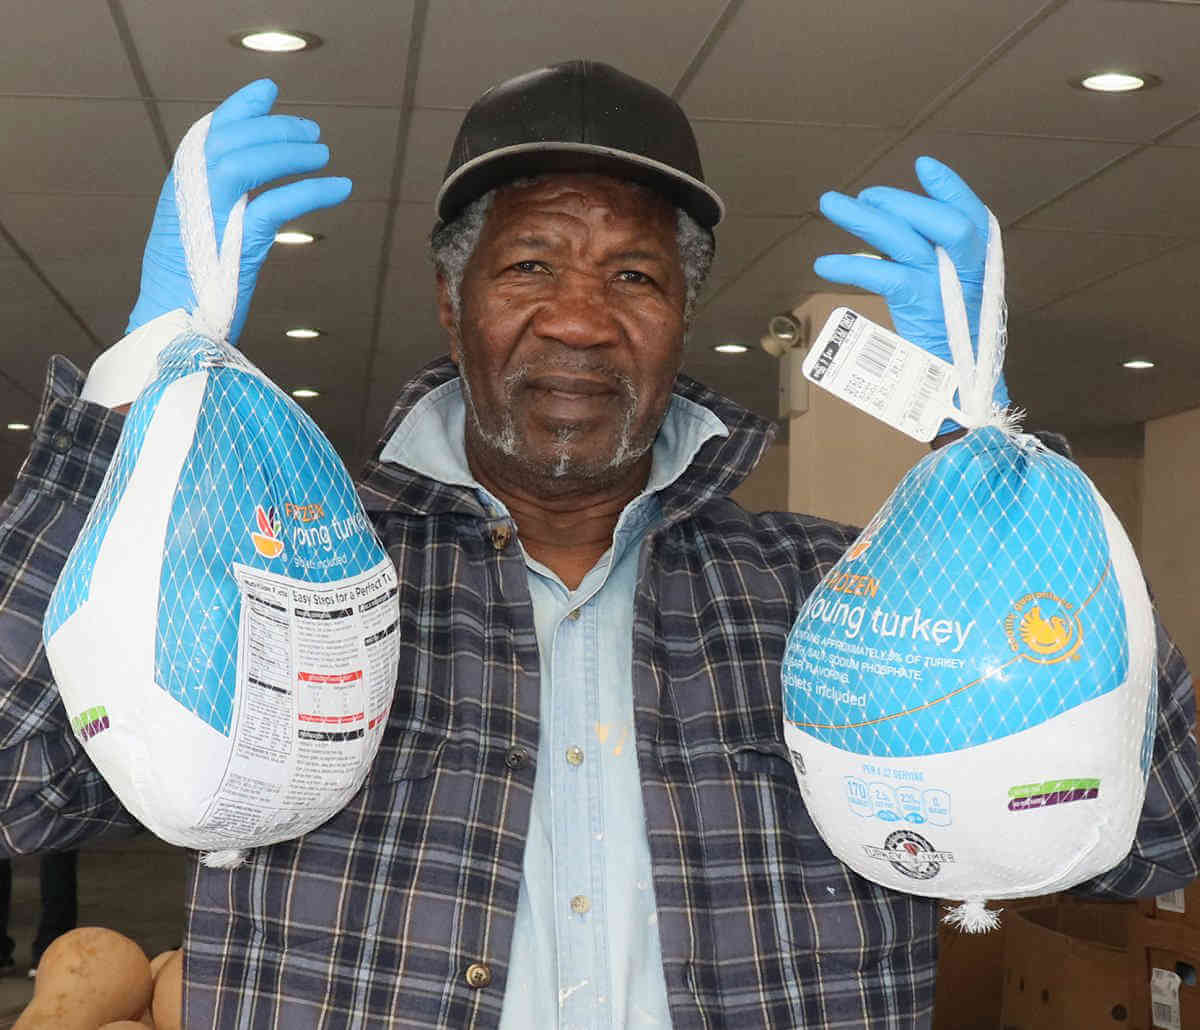 Food Bank For New York City Provide Thanksgiving Cheer|Food Bank For New York City Provide Thanksgiving Cheer|Food Bank For New York City Provide Thanksgiving Cheer